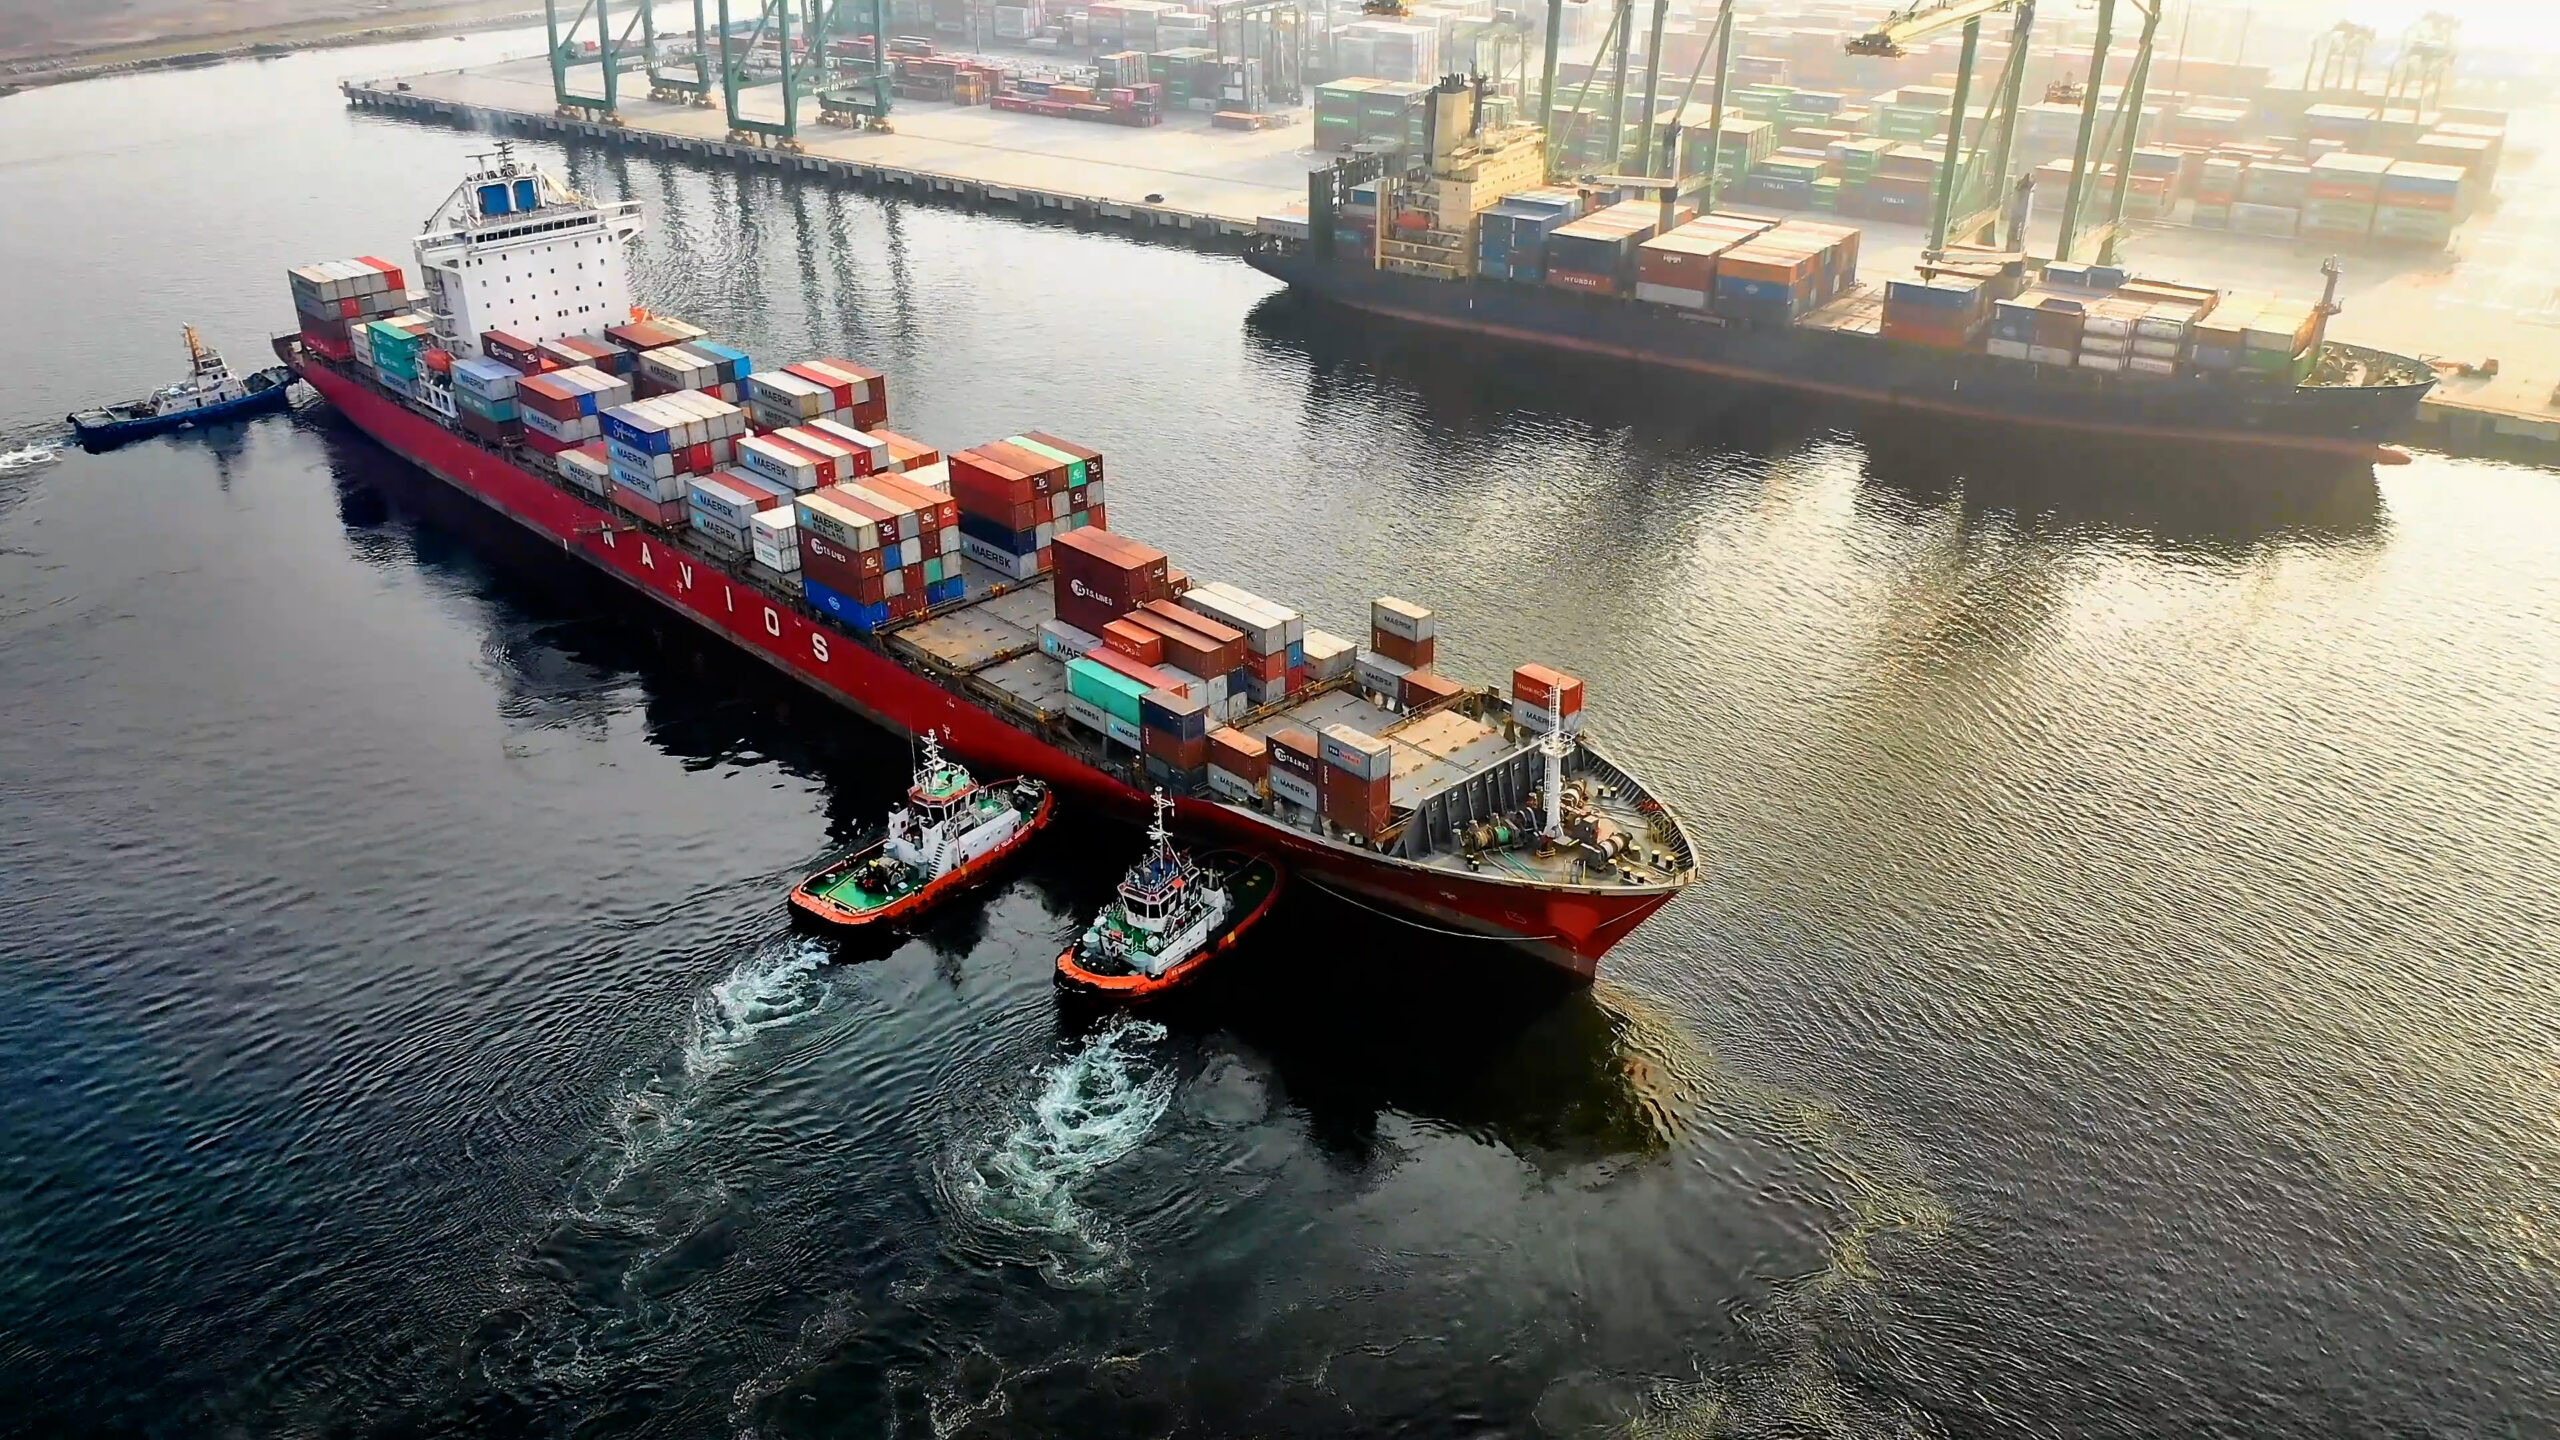 Aerial view of a container ship floating on the water. The ship seems to be in the middle of a voyage, and it is likely transporting large quantities of goods in shipping containers. The image captures the vast size and scope of the ship, as well as the surrounding water and landscape.